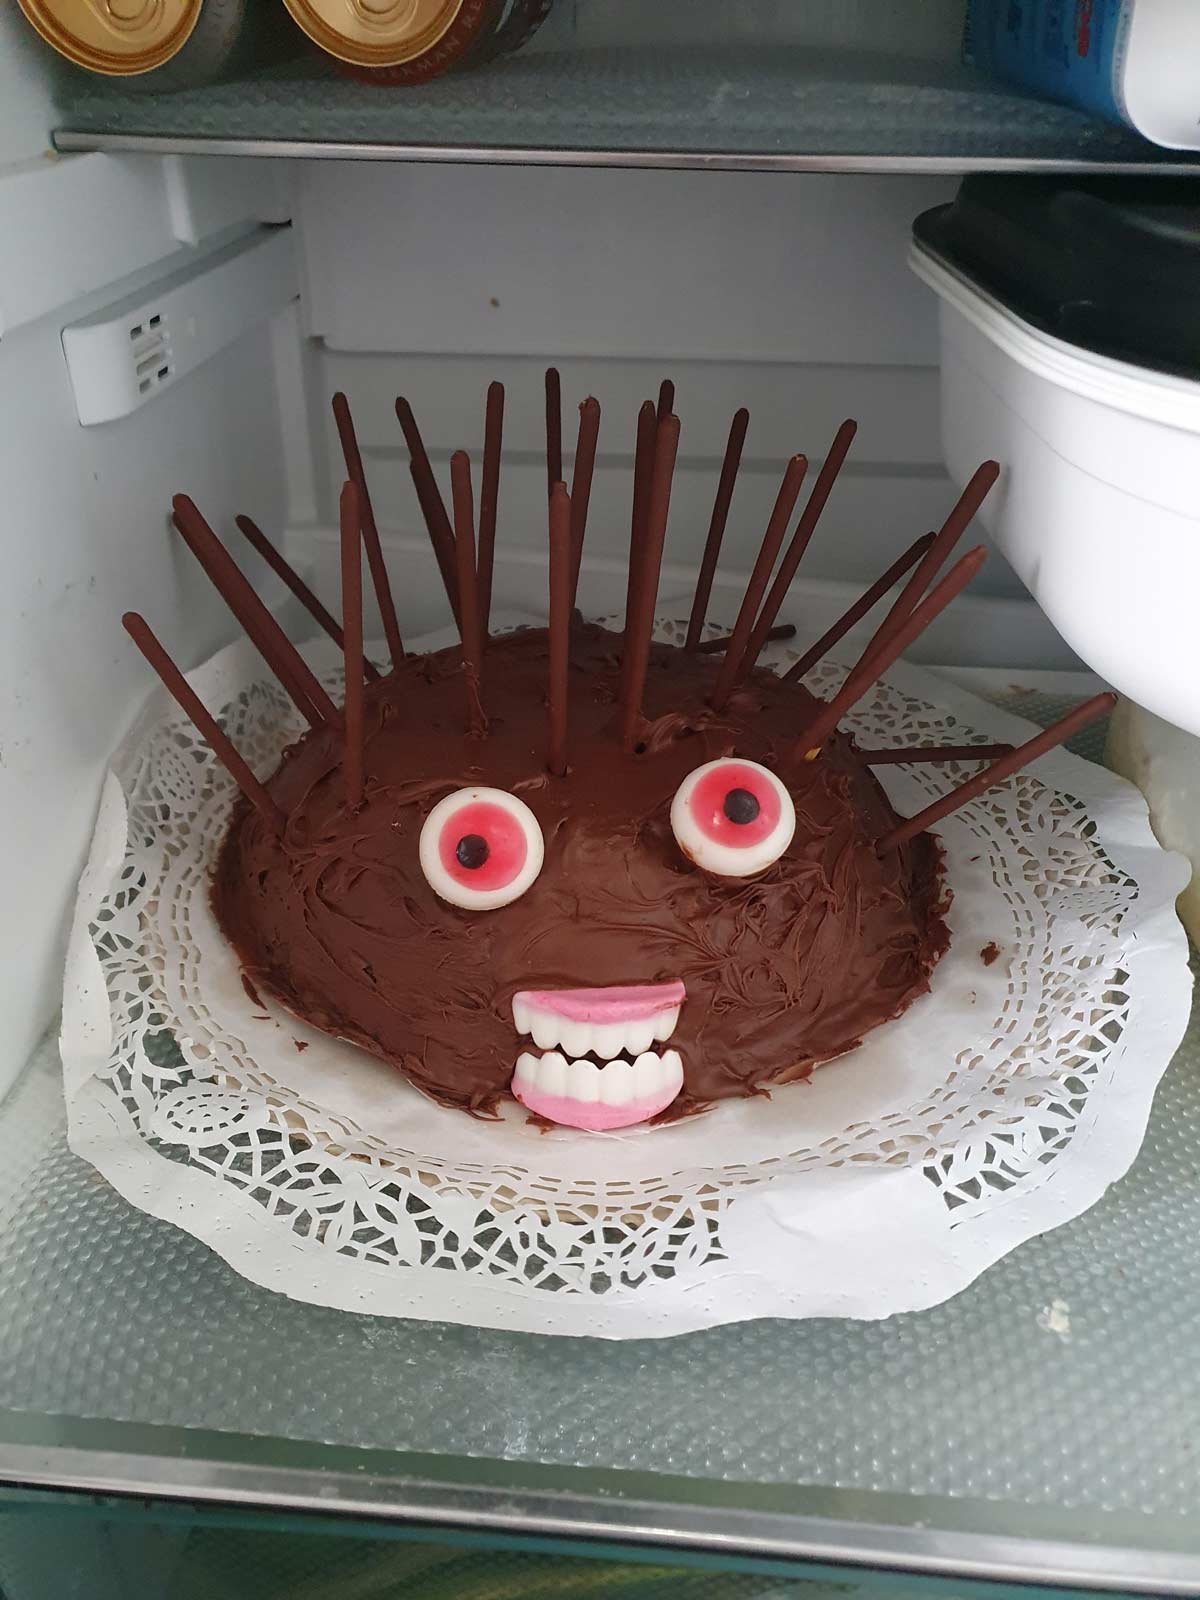 There is going to be a fund raiser as a cake competition at my little sister's school and she made this